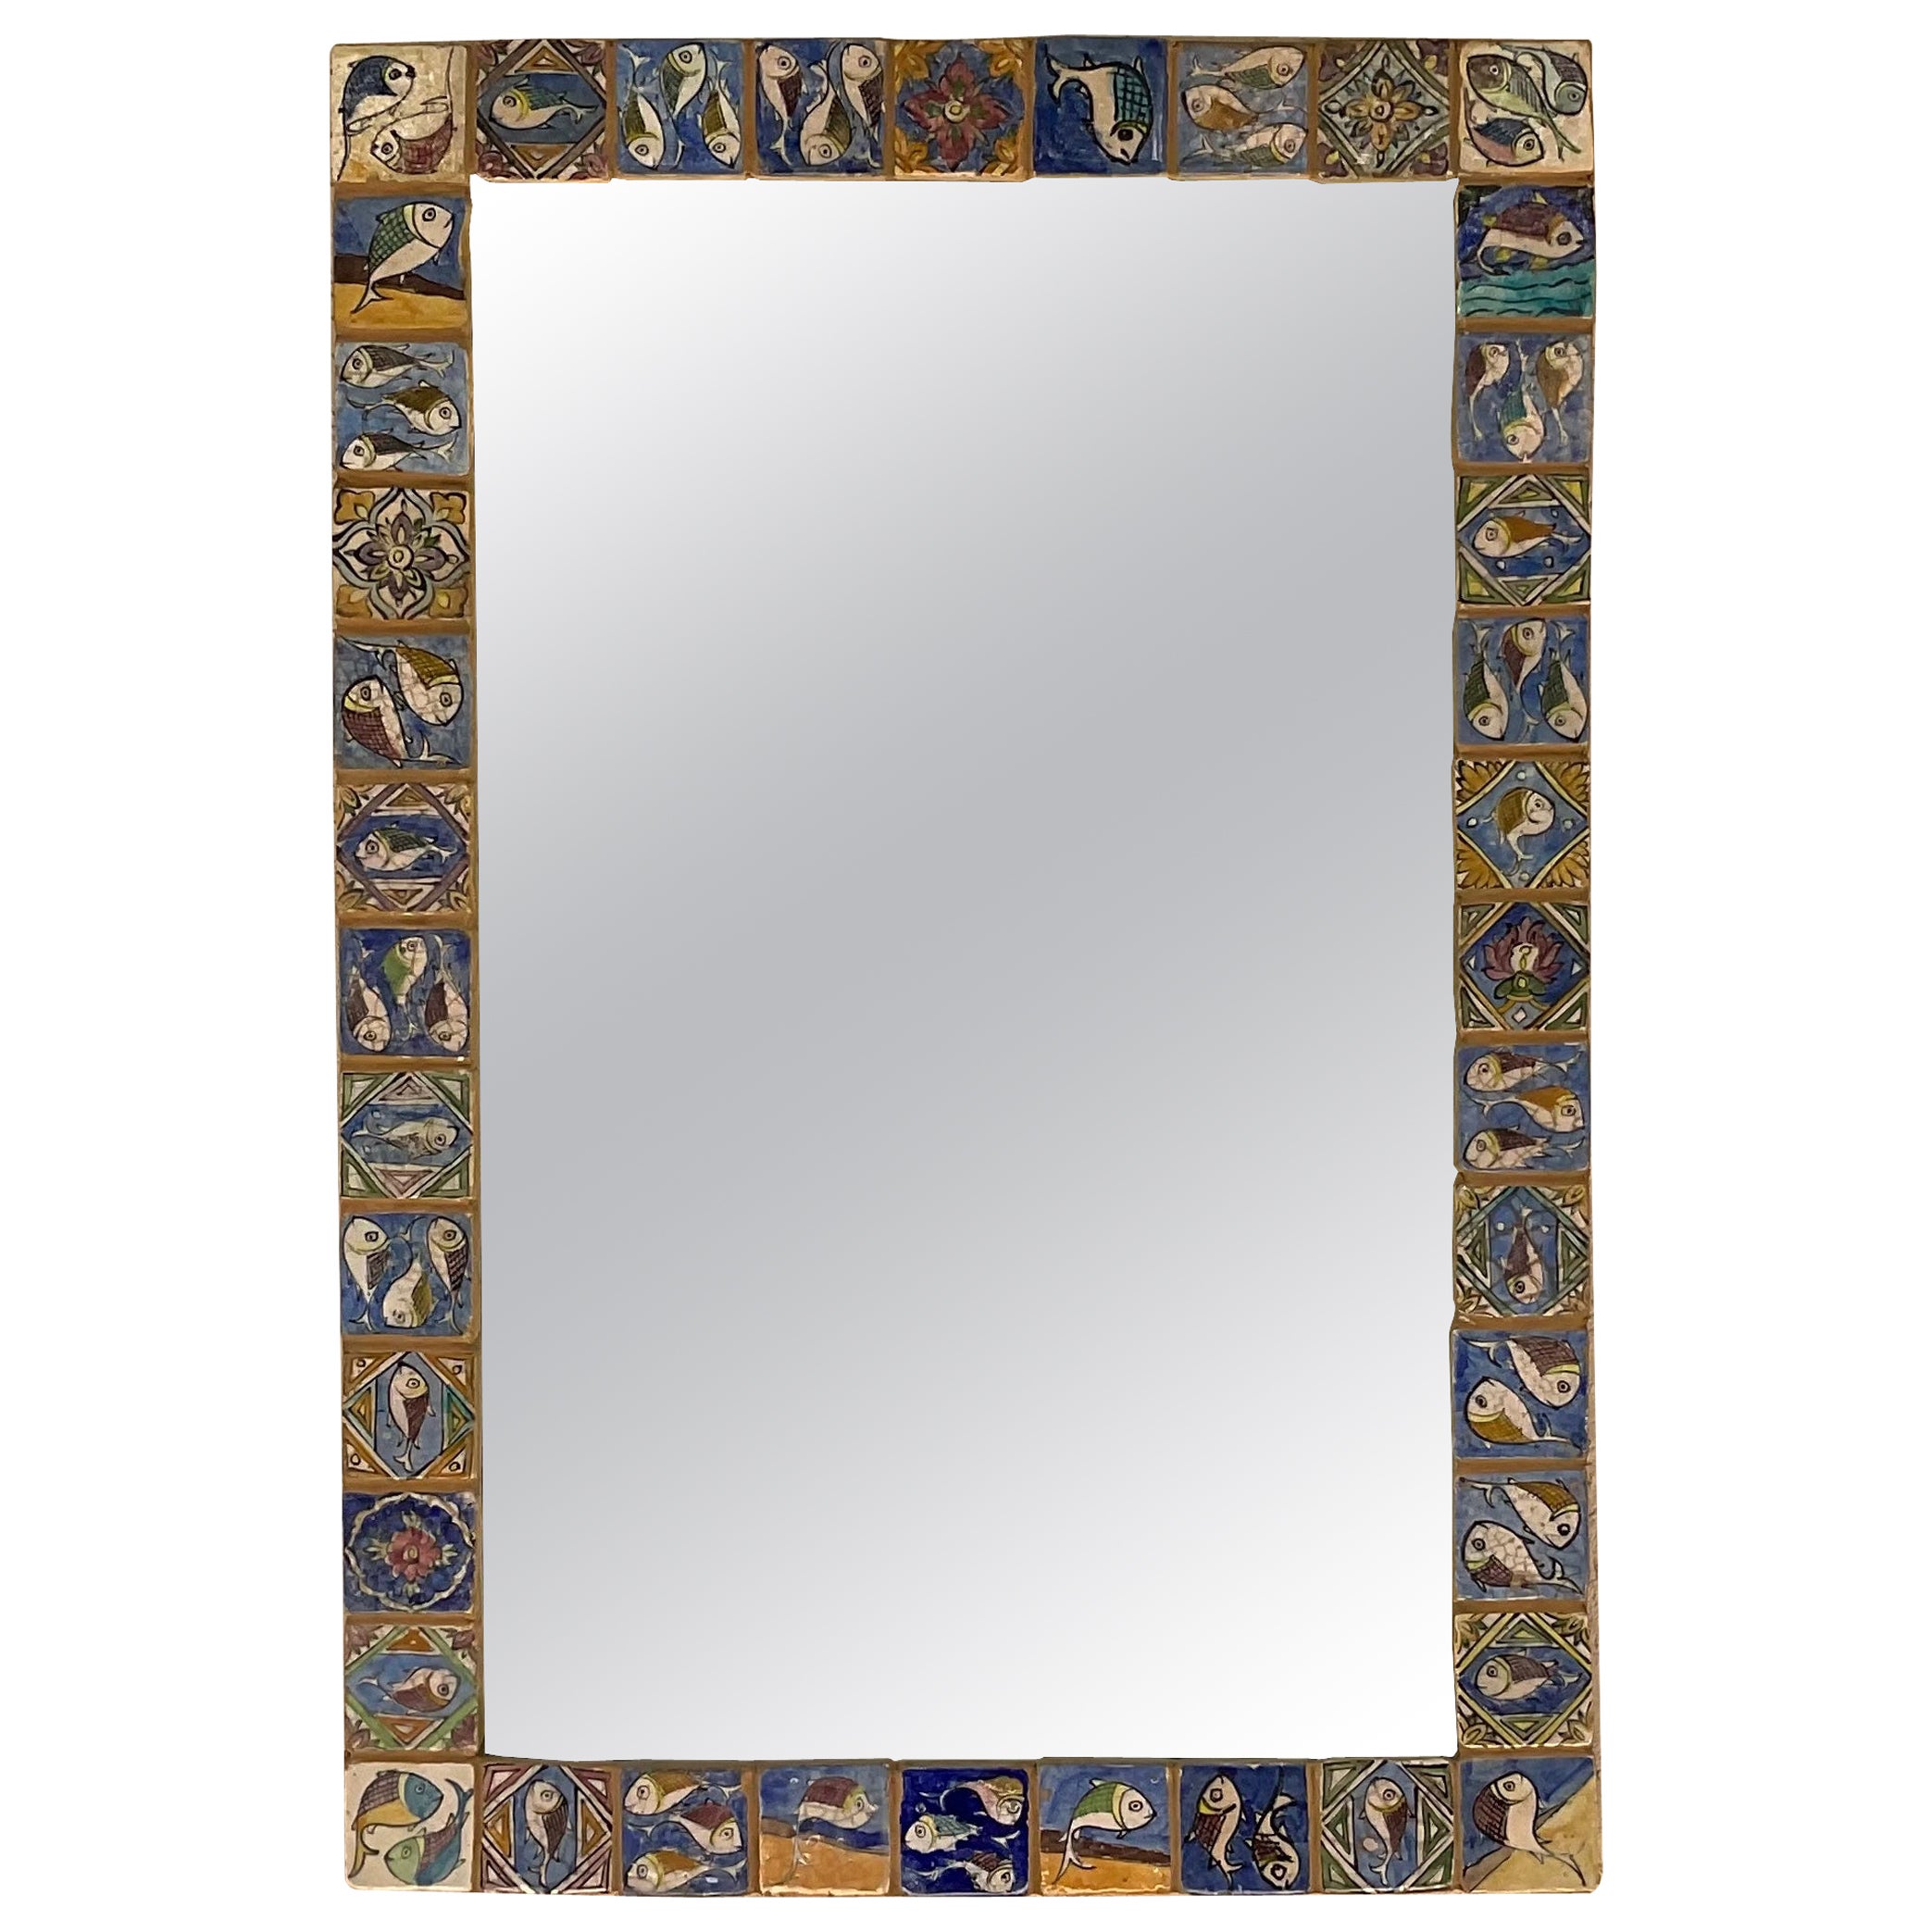 One of a Kind Large Hand Painted Ceramic Tile Mirror